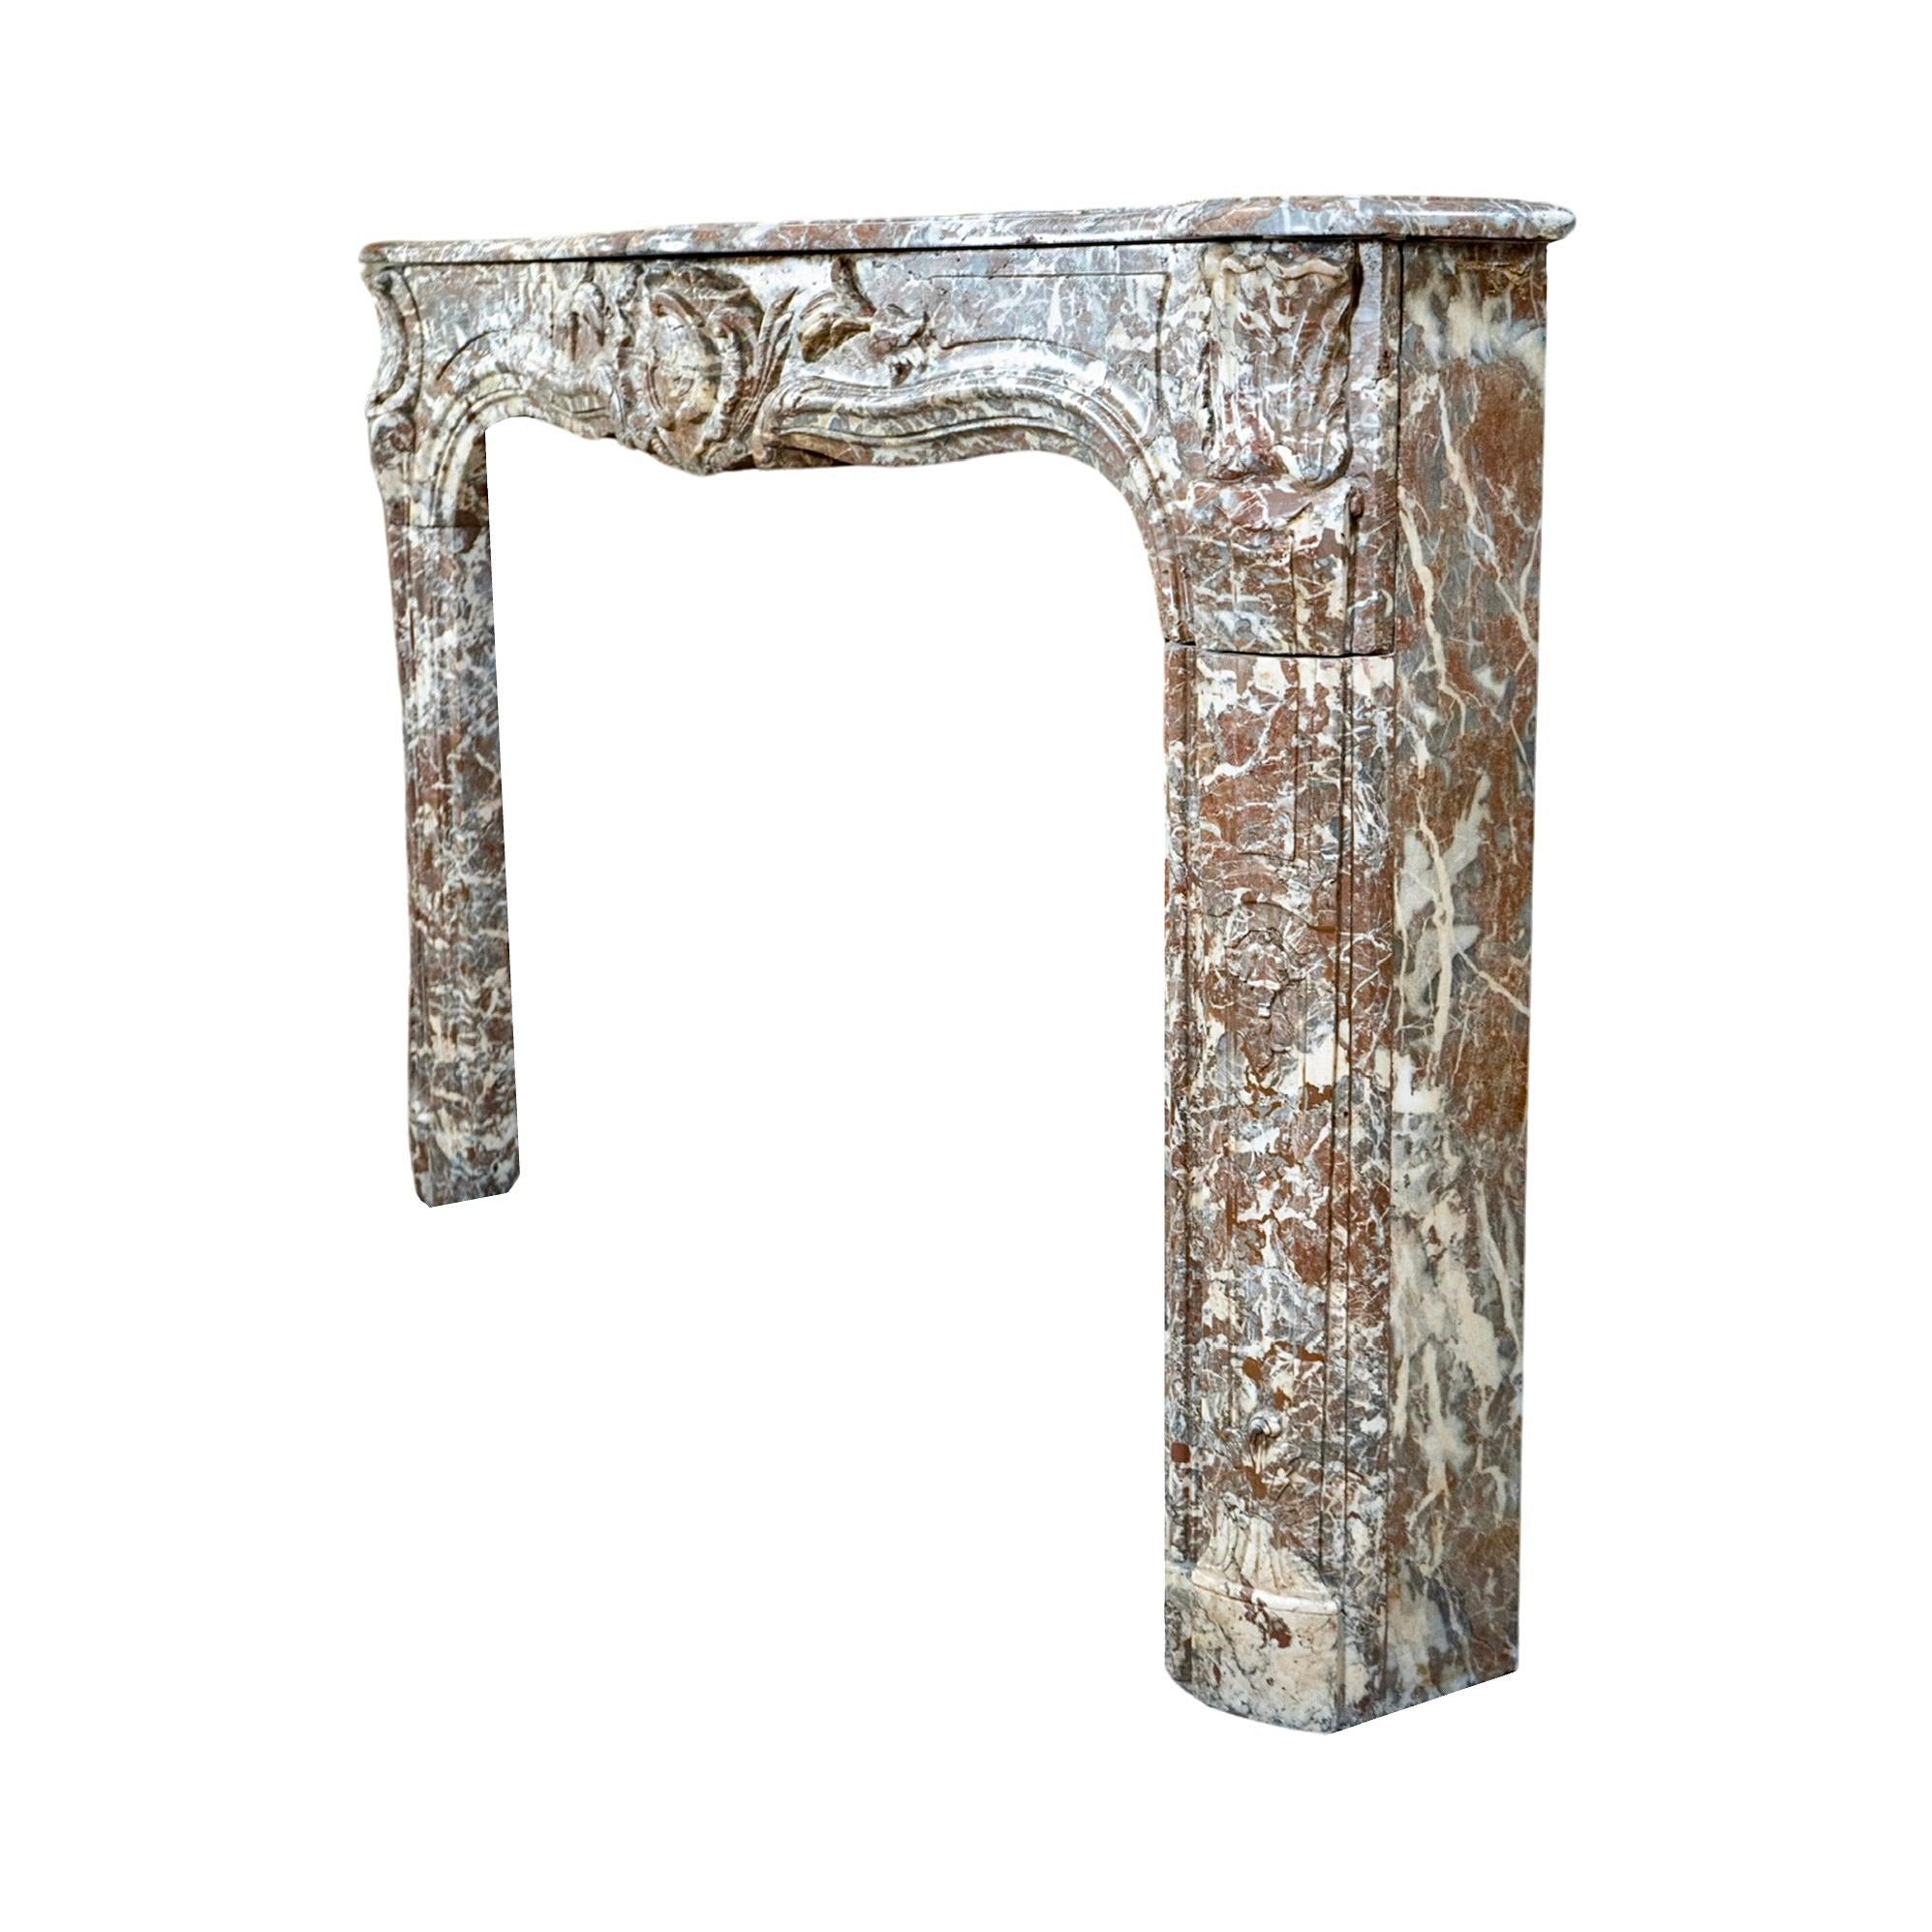 Expertly crafted in the 1820s, this French Ardennes Grey Marble Mantel exudes elegance and sophistication. Its Louis XVI design features a carved motif in the center and on the mantel legs, adding a touch of opulence to any room. Made from Ardennes